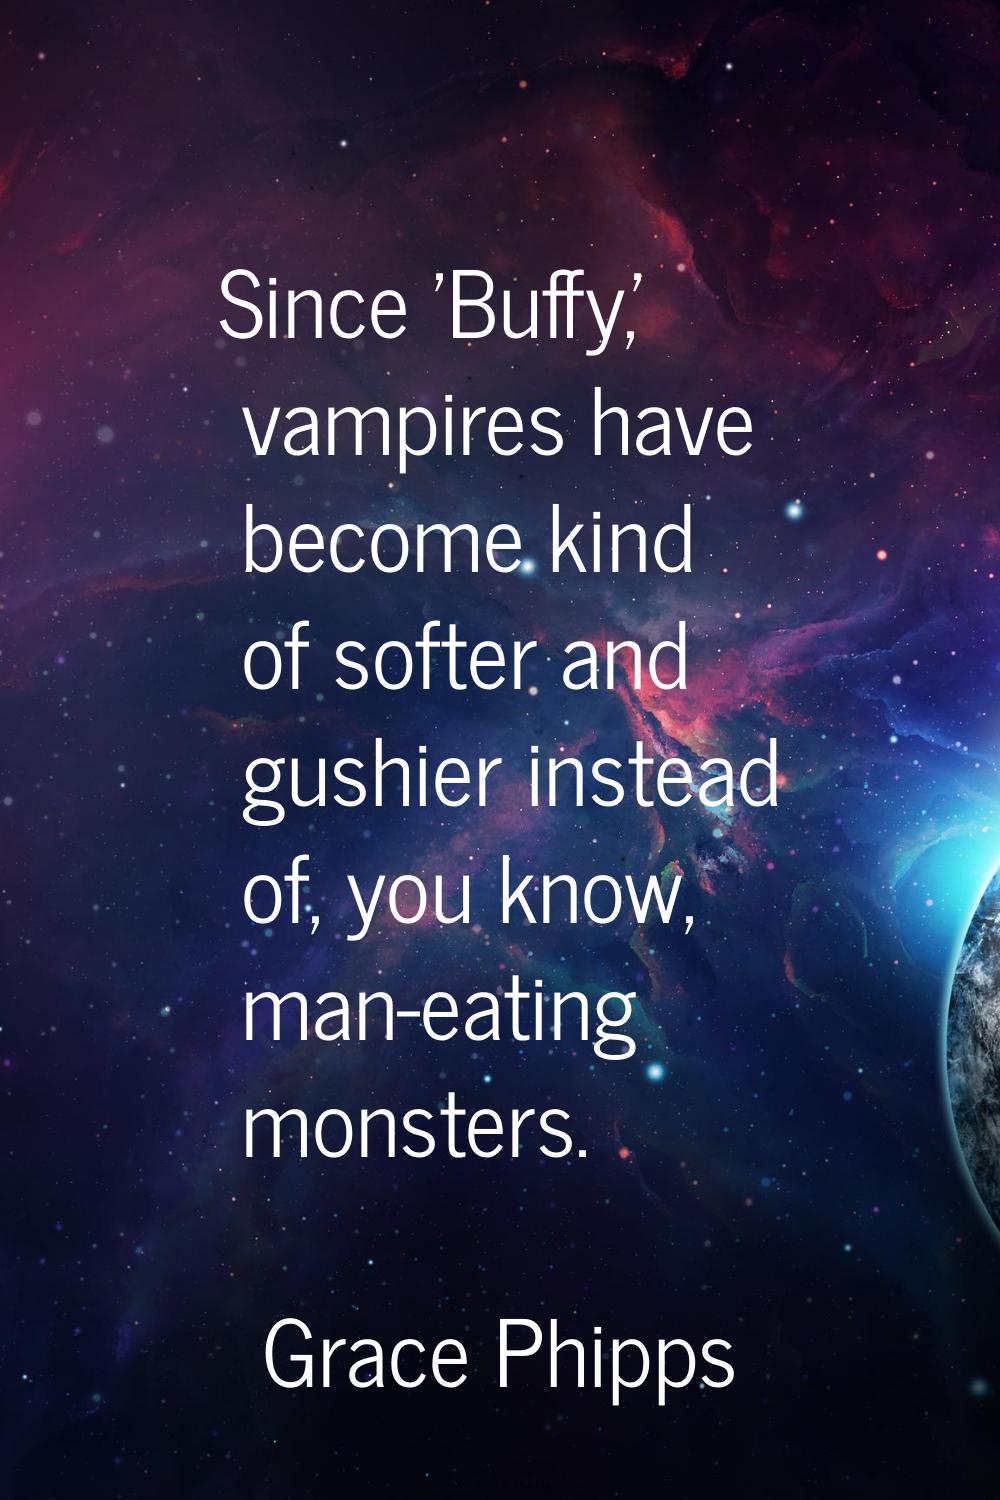 Since 'Buffy,' vampires have become kind of softer and gushier instead of, you know, man-eating mon